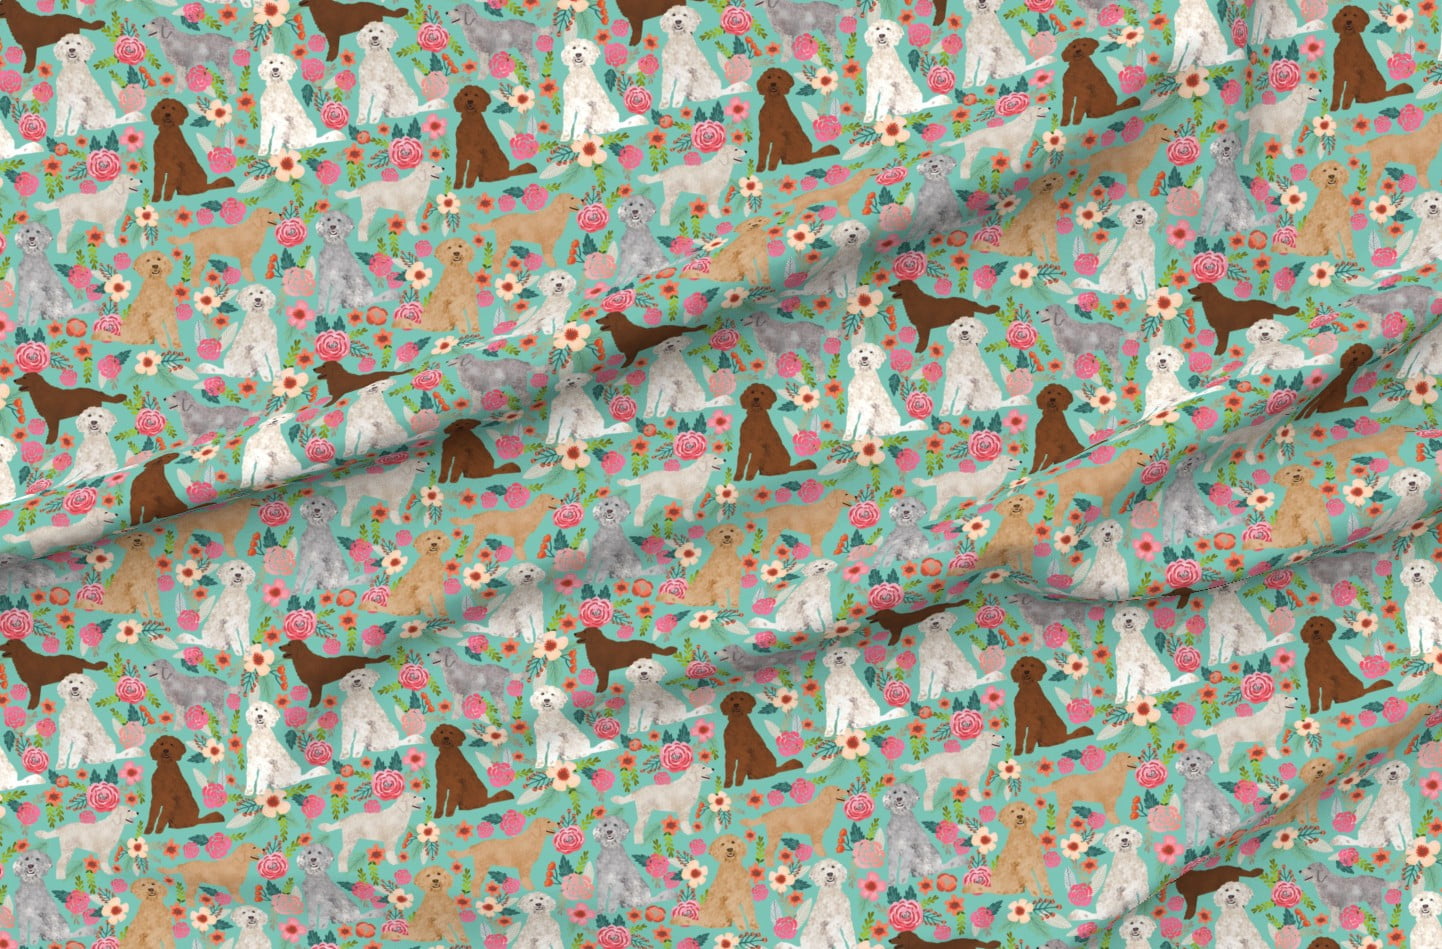 Floral Golden Doodles Small Dog Home Decor Fabric Printed by Spoonflower BTY 